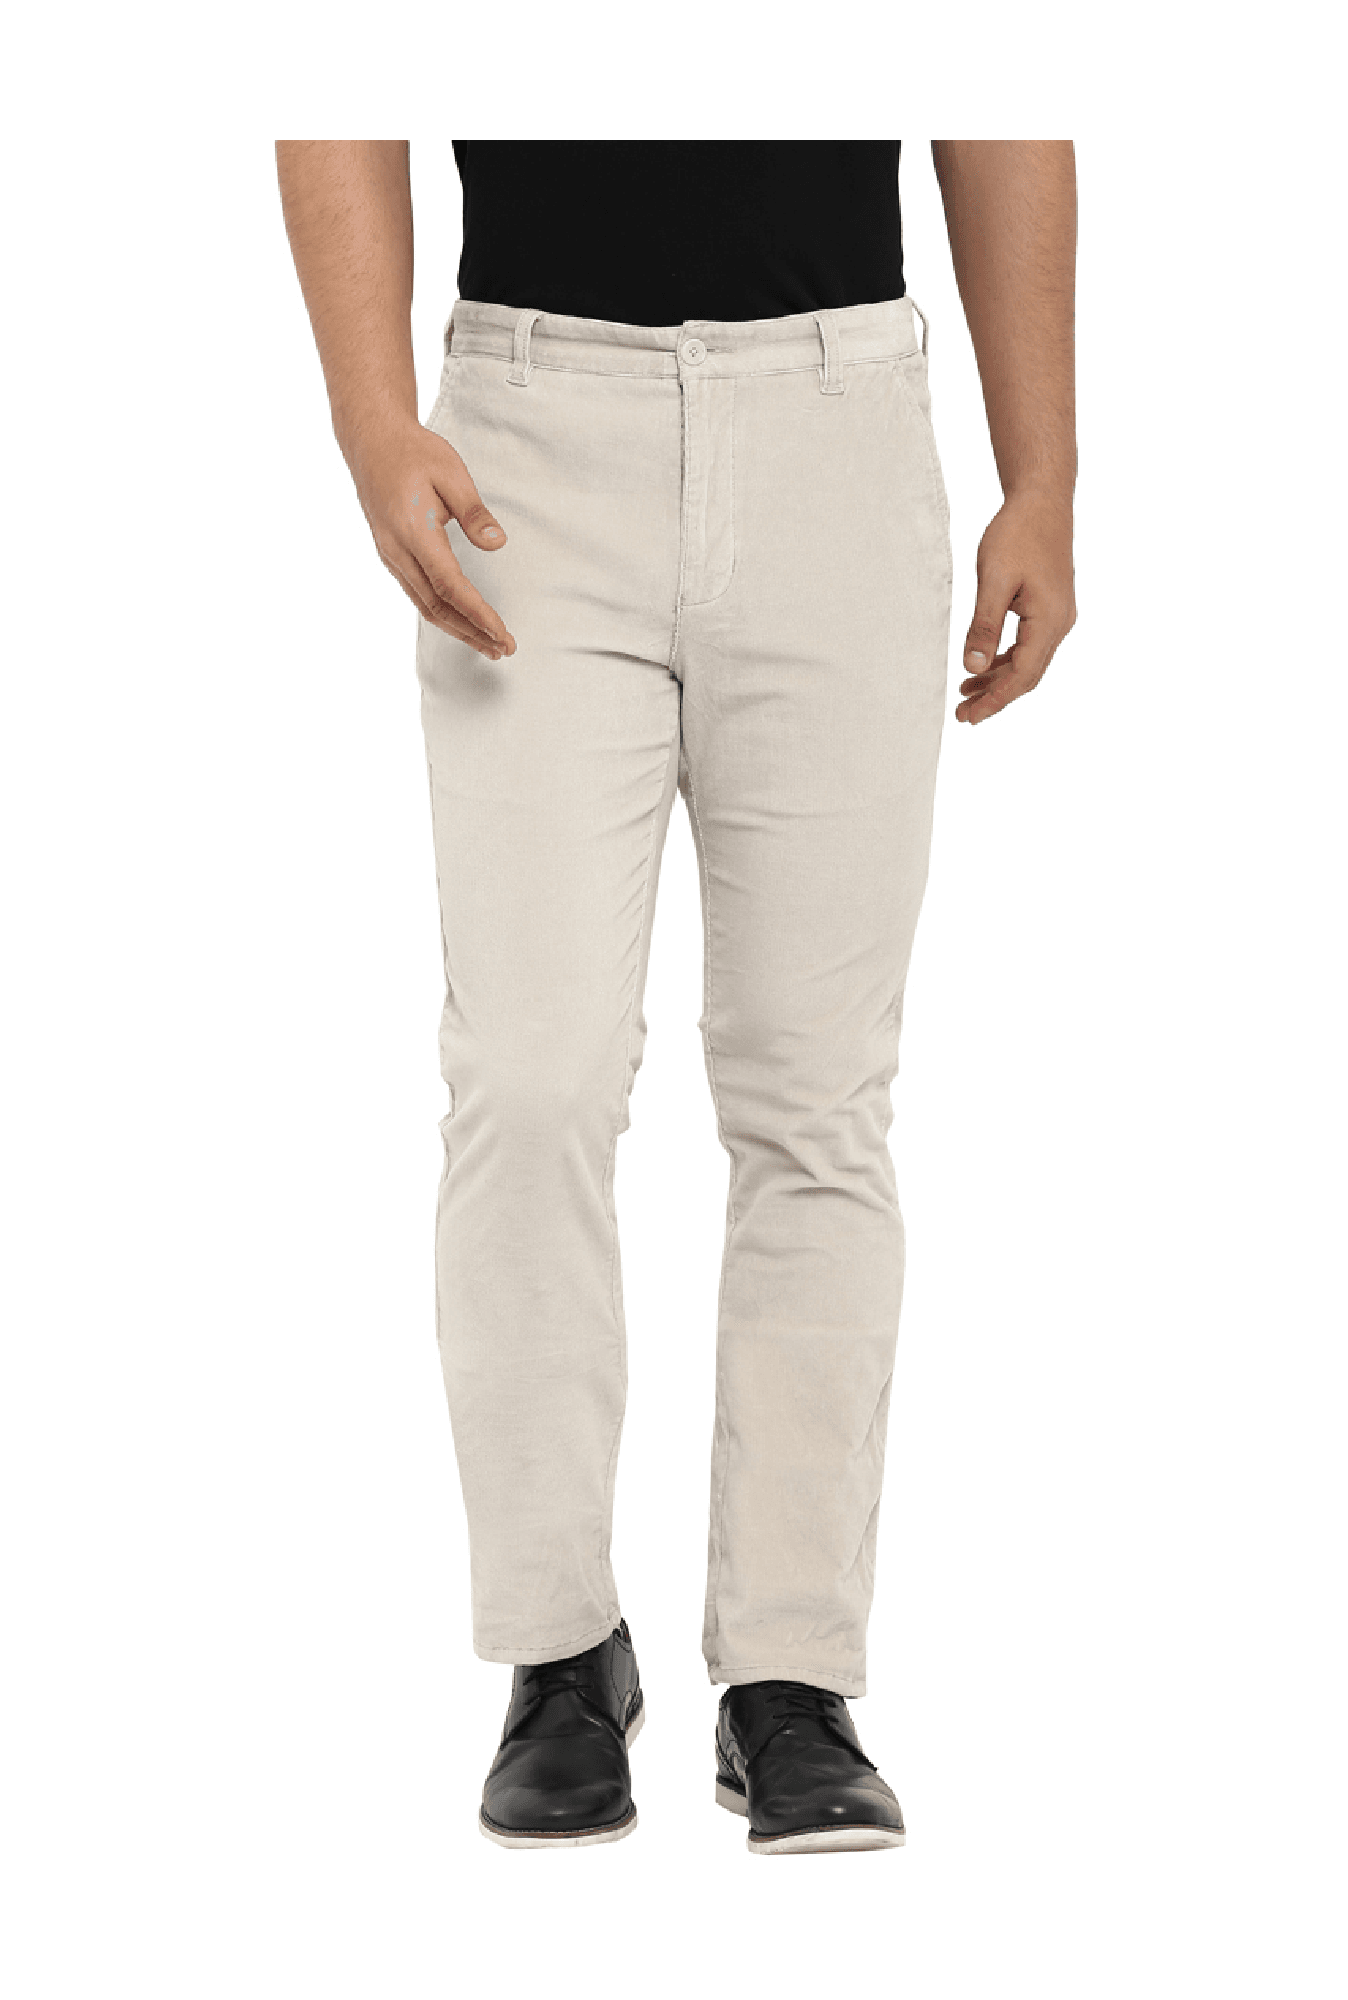 Buy Parx Carrot Fit Solid Light Fawn Trouser online